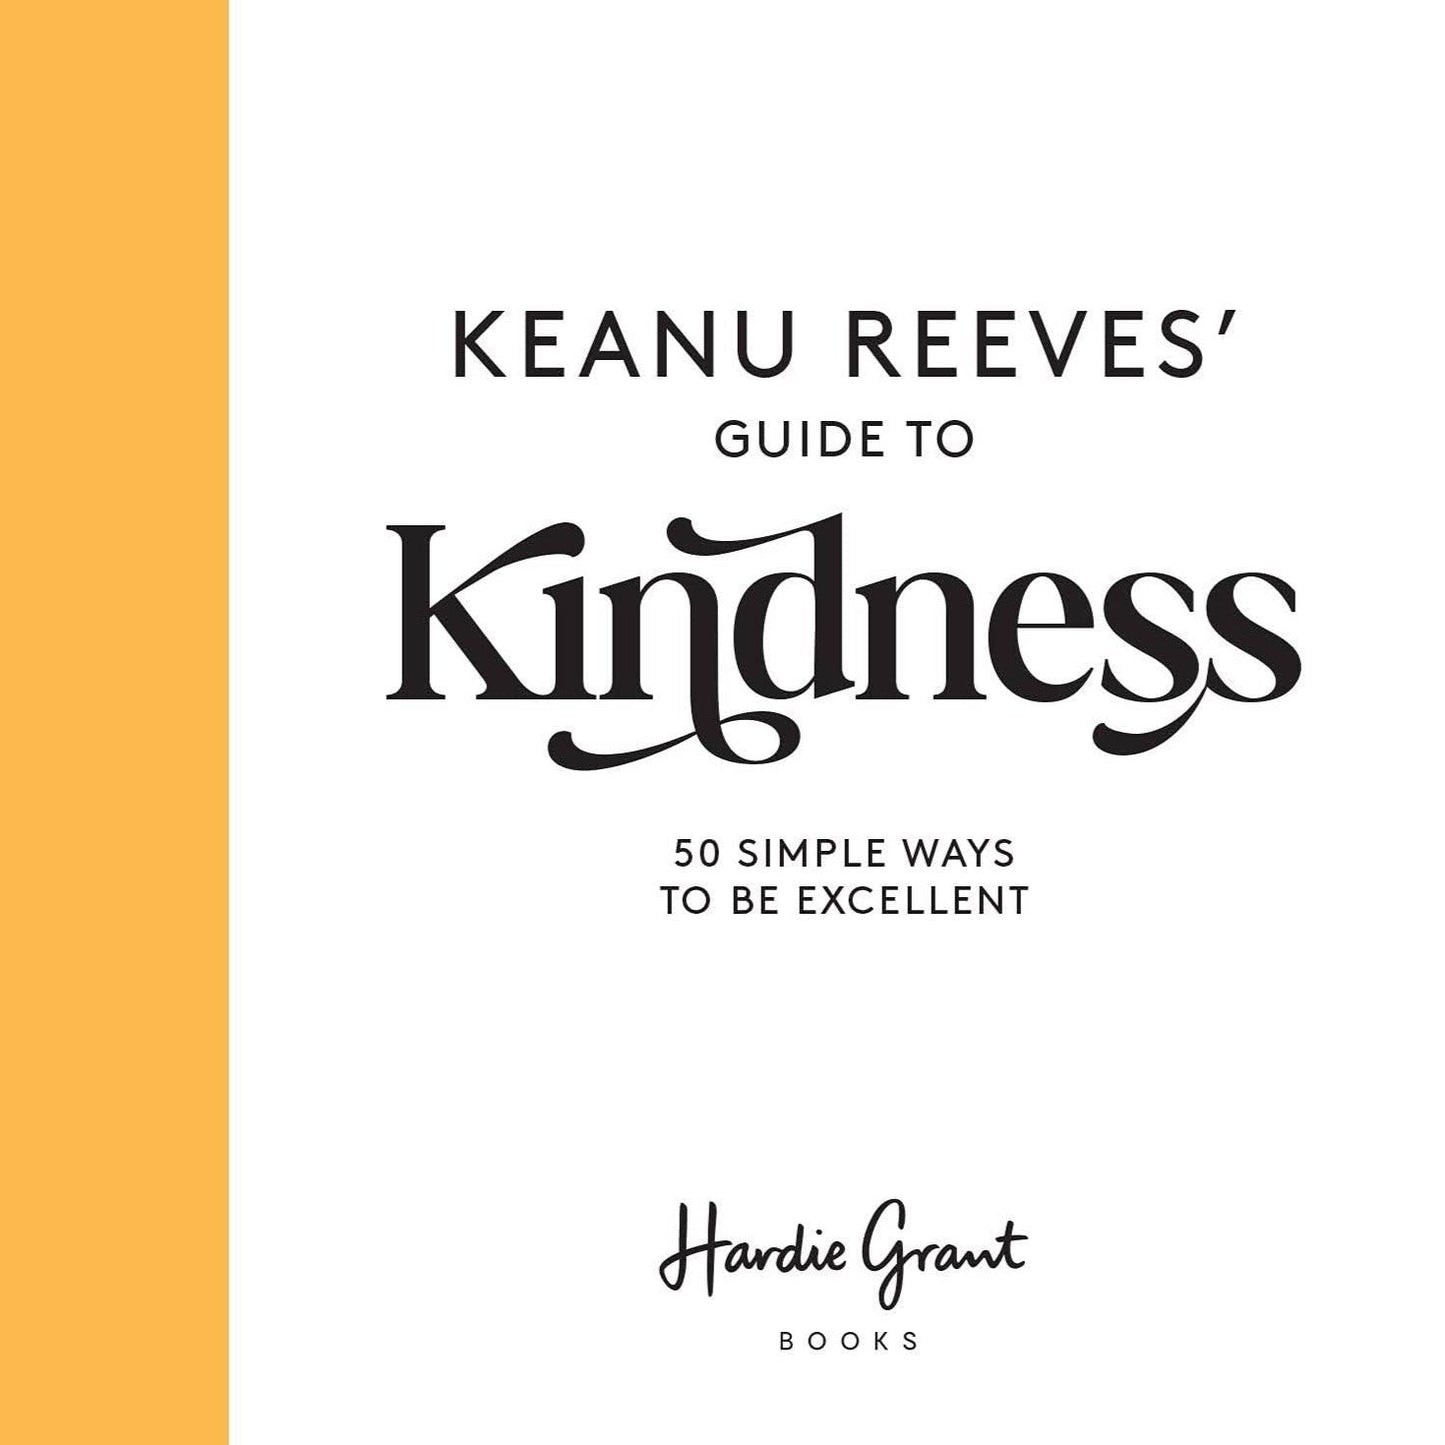 Keanu Reeves’  Guide to Kindness: 50 Simple Ways to Be Excellent